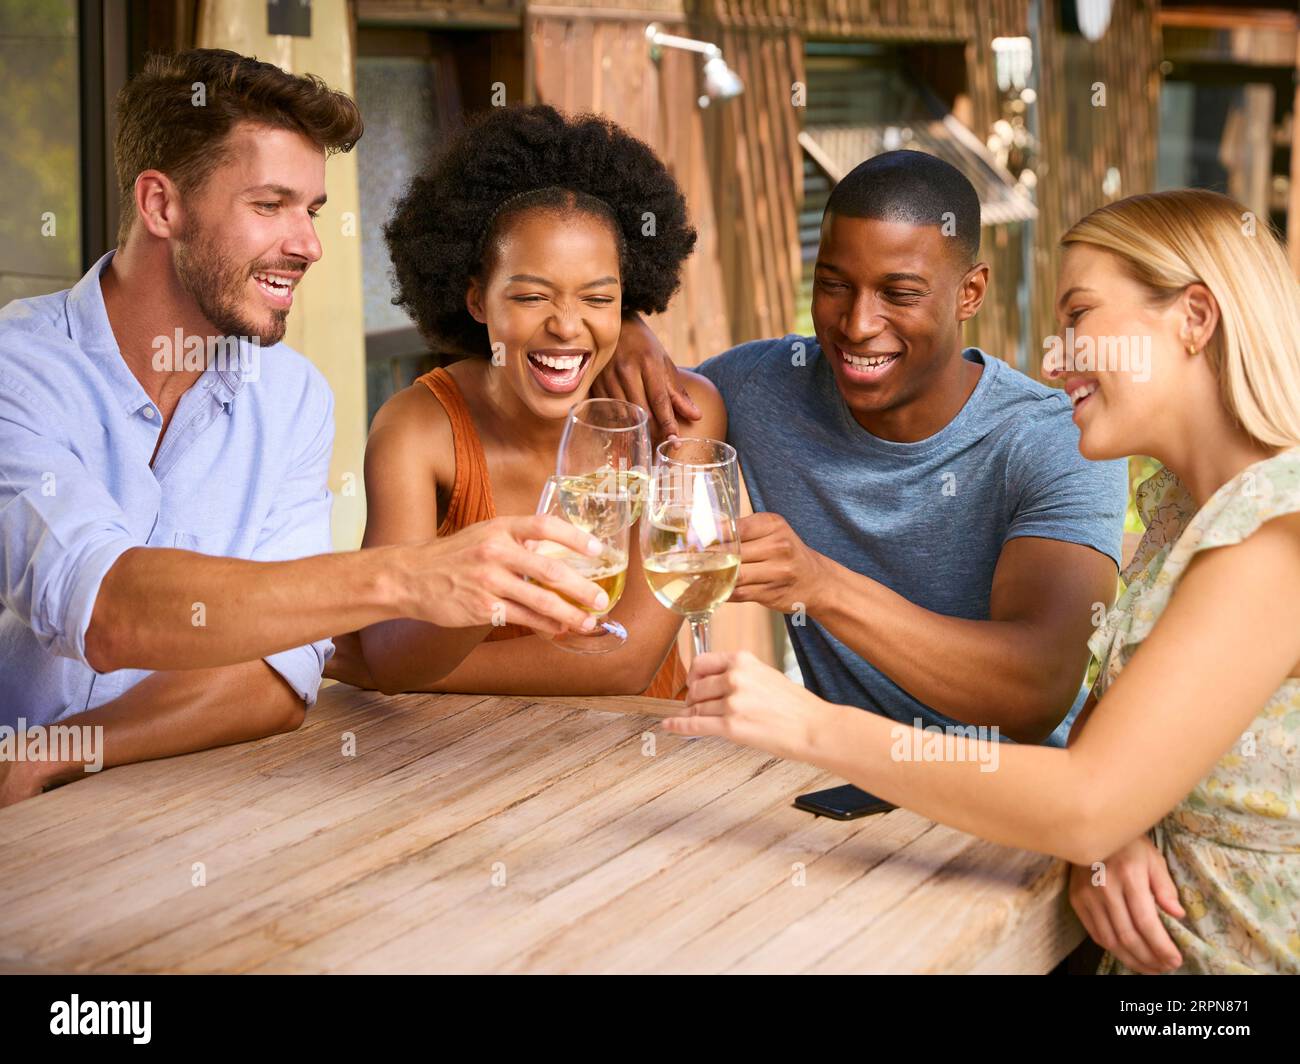 Group Of Smiling Multi-Cultural Friends Outdoors At Home Drinking Wine Together Stock Photo